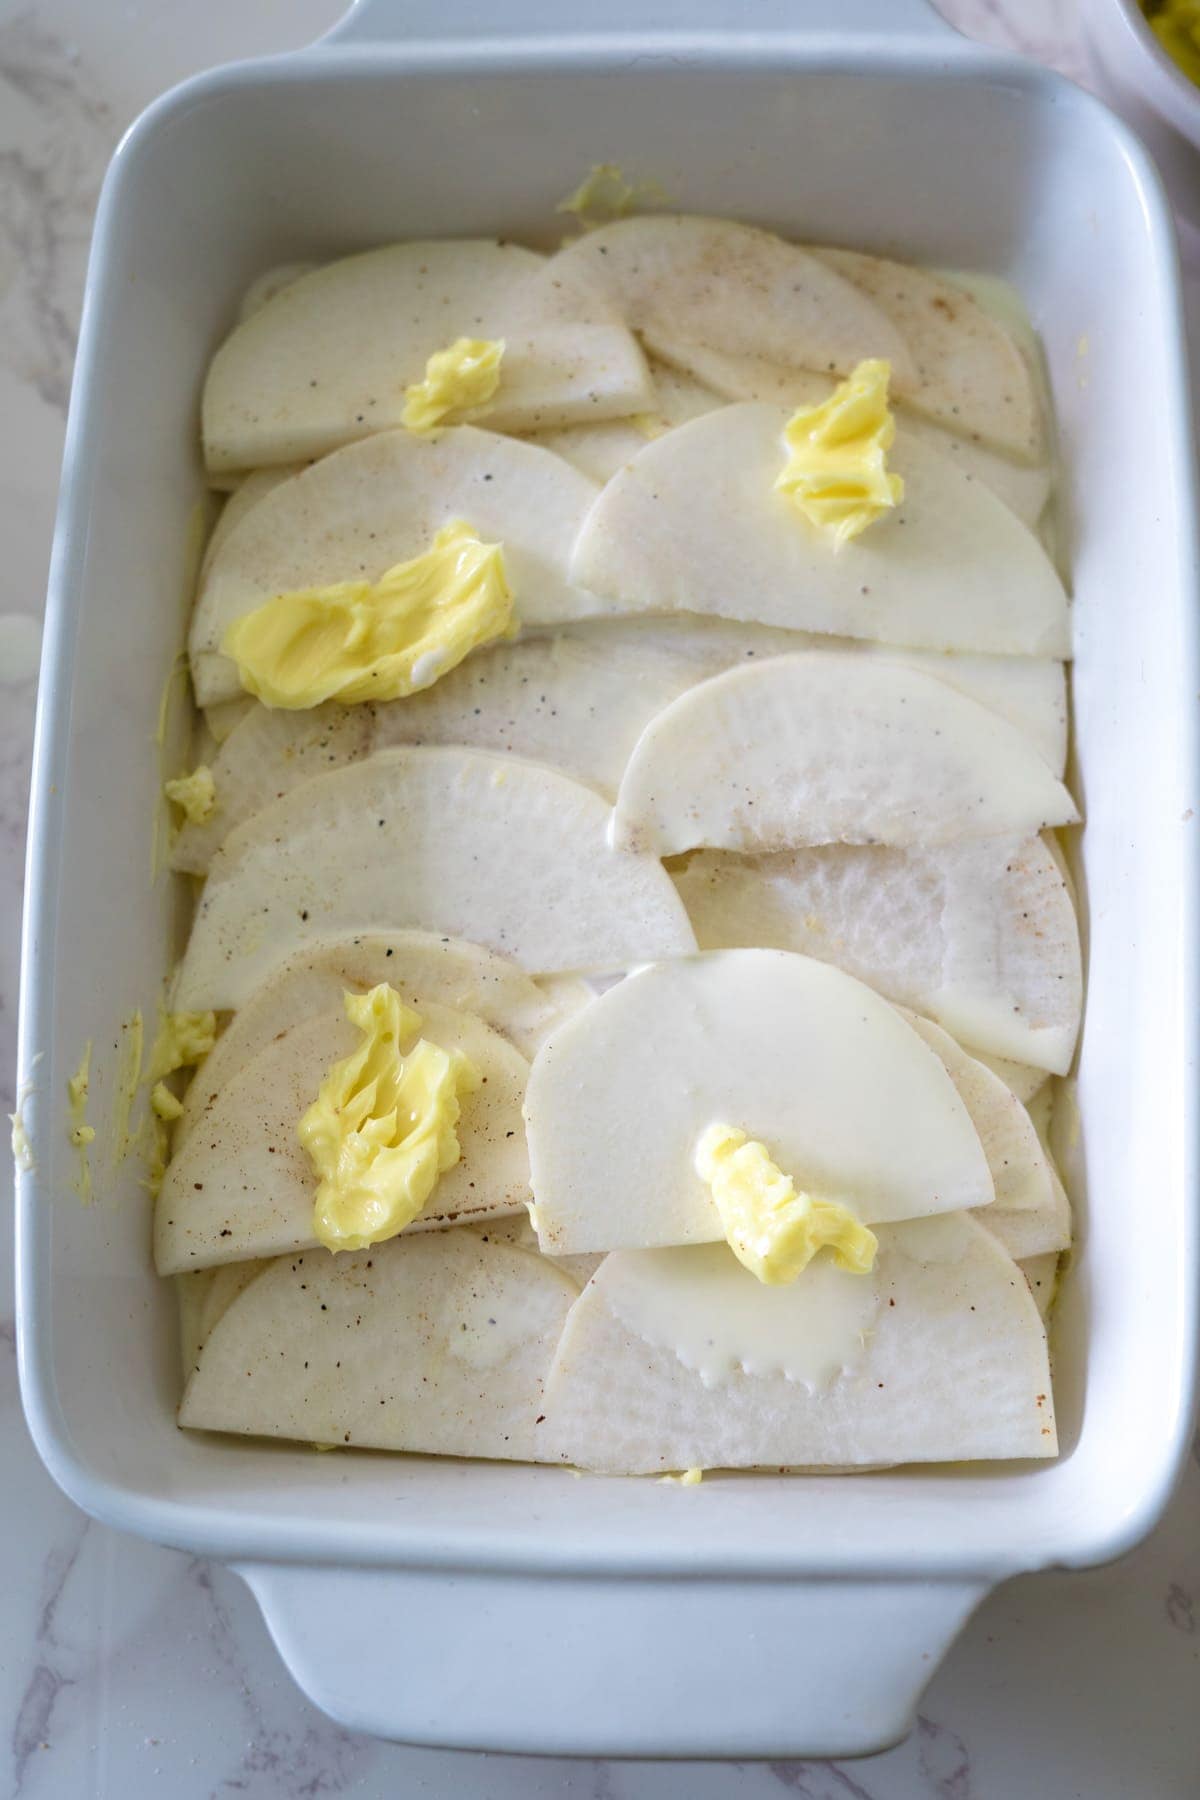 Sliced potatoes in a baking dish with butter, baked to perfection for a delicious turnip gratin.